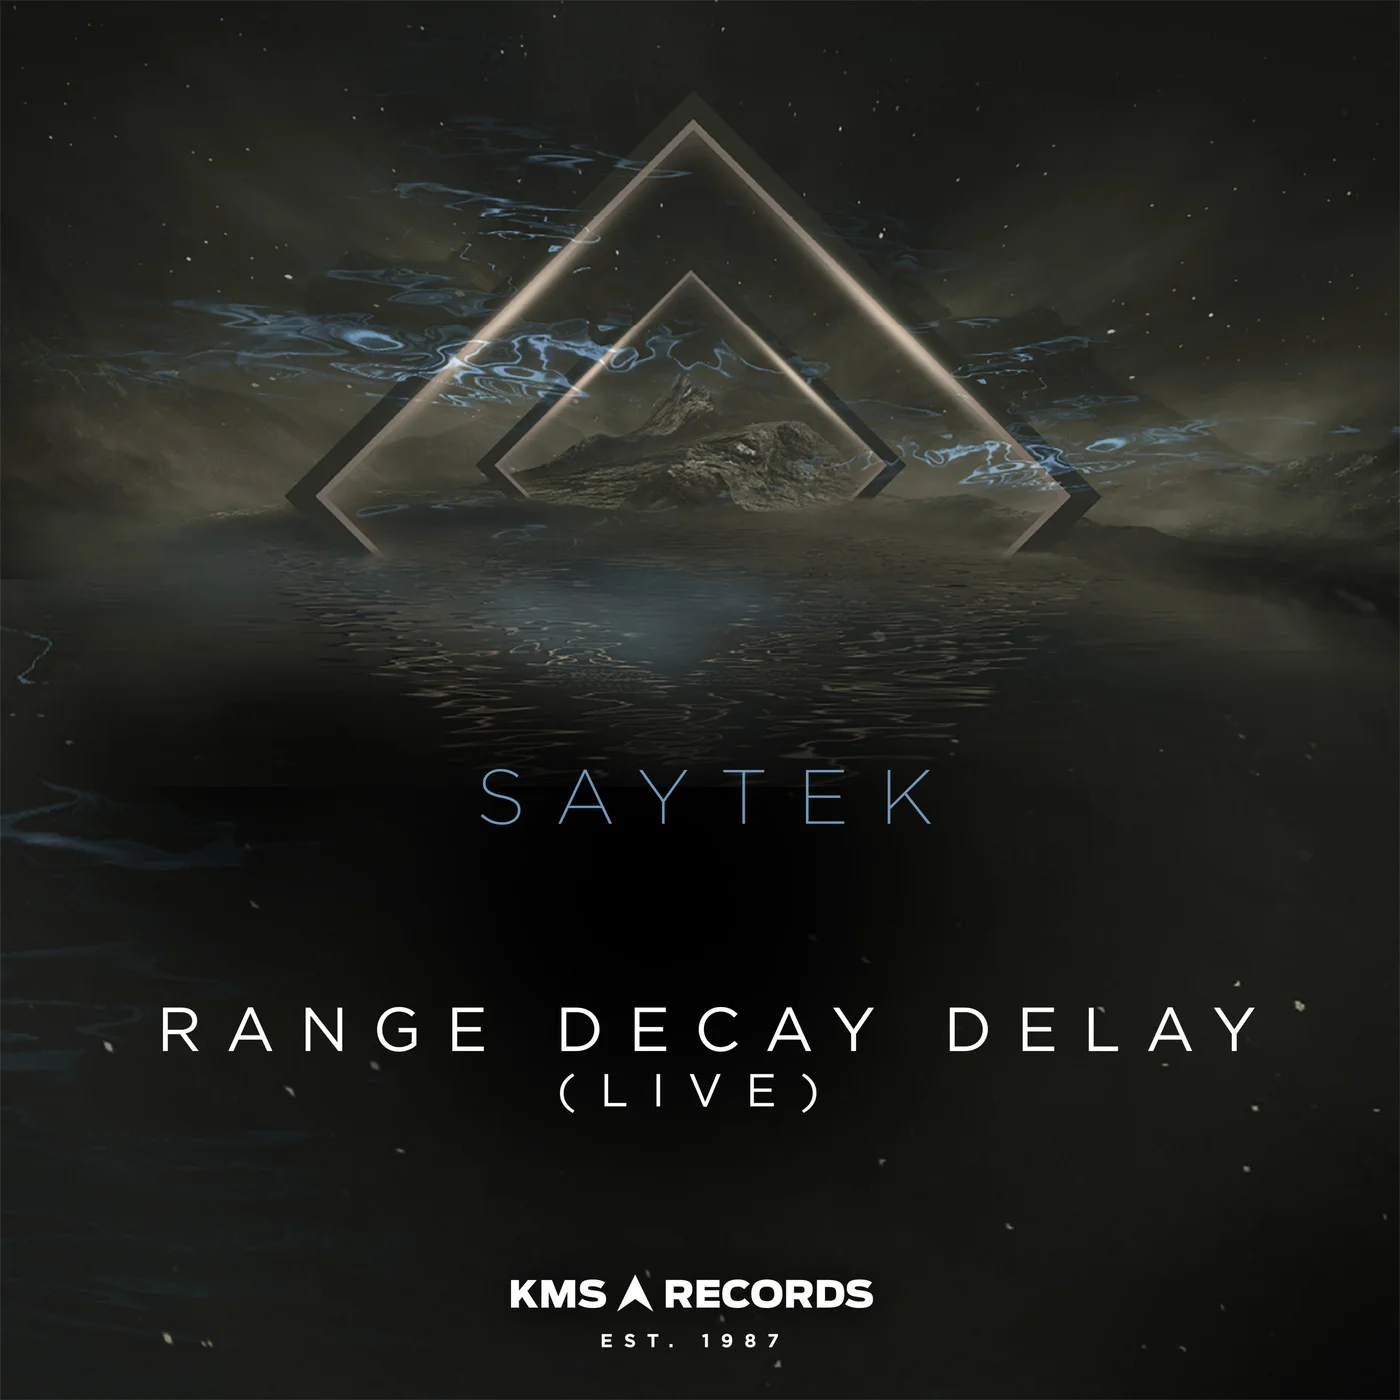 Renowned live electronic music artist Saytek is set to release "Range Decay Delay (Live)"